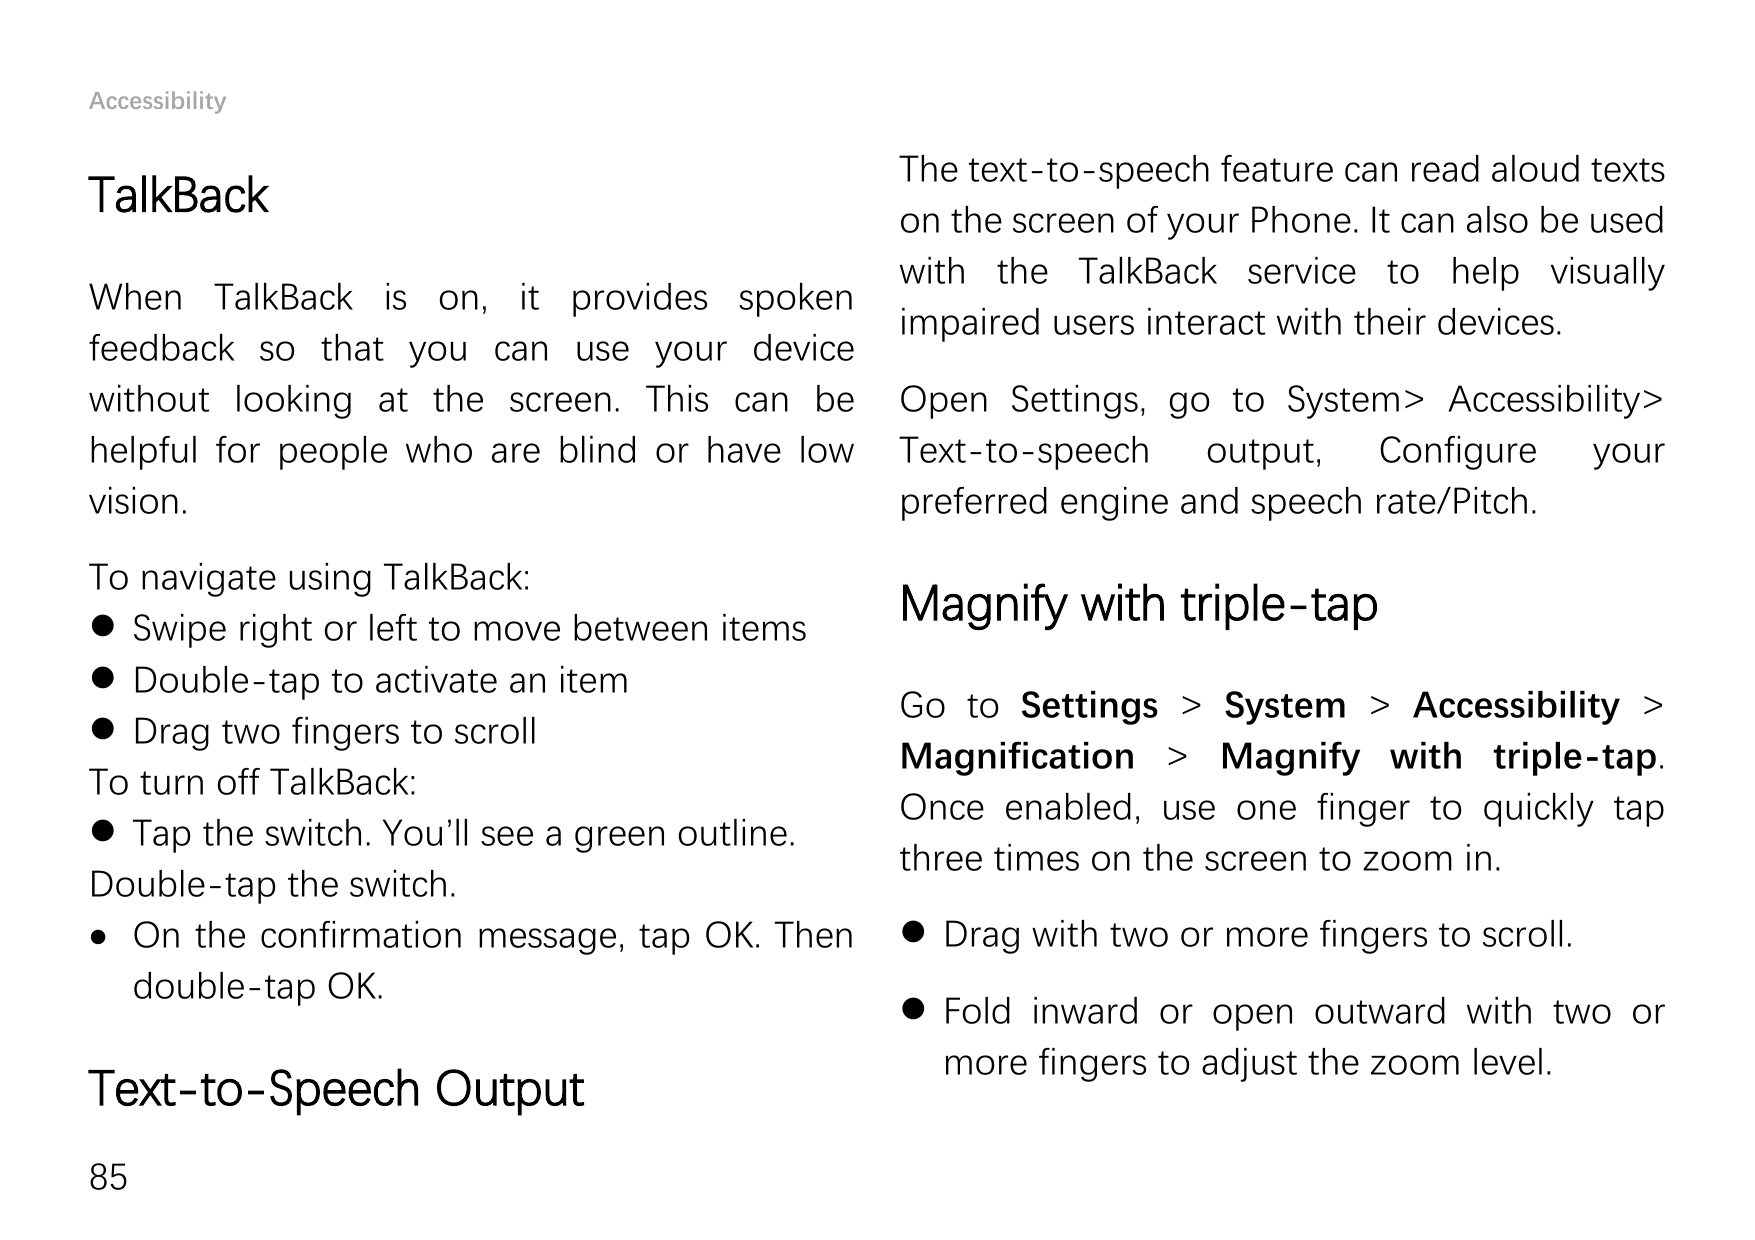 AccessibilityTalkBackWhen TalkBack is on, it provides spokenfeedback so that you can use your devicewithout looking at the scree